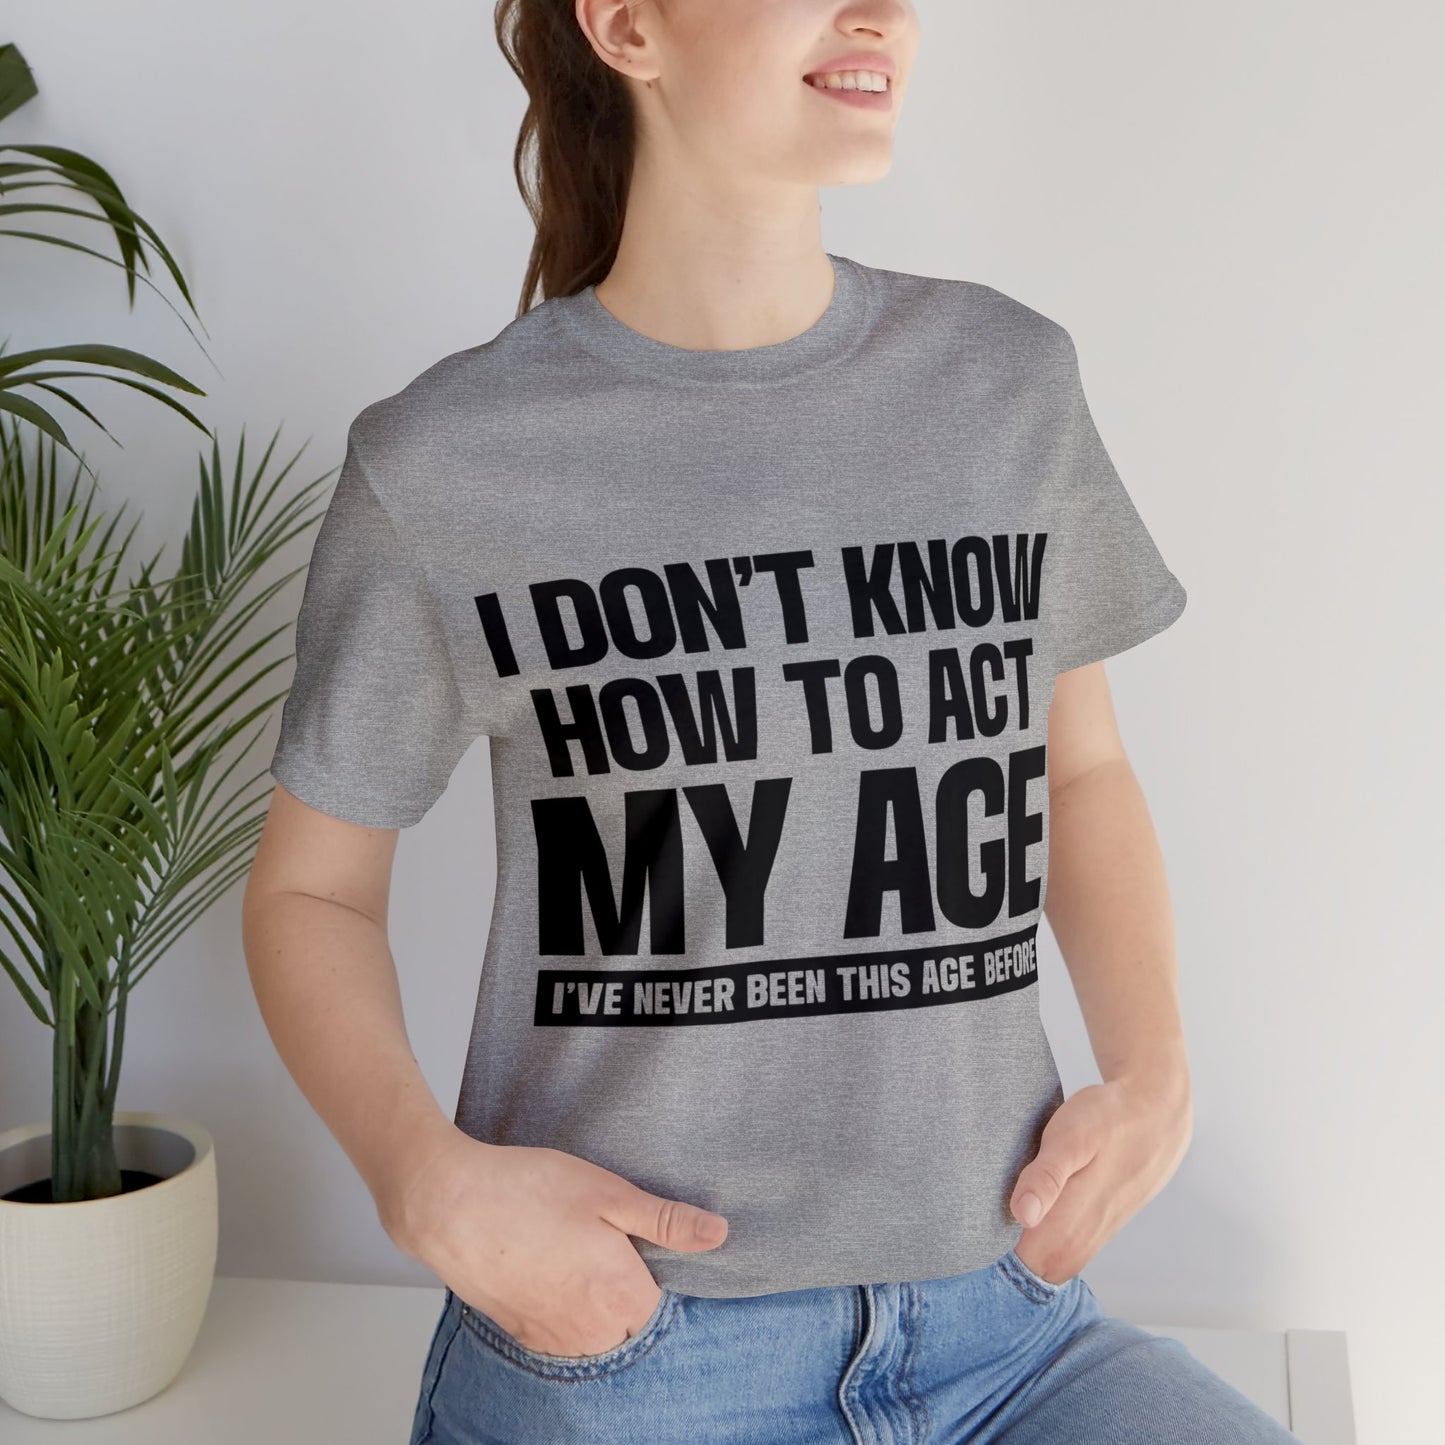 Act Your Age Unisex Tee